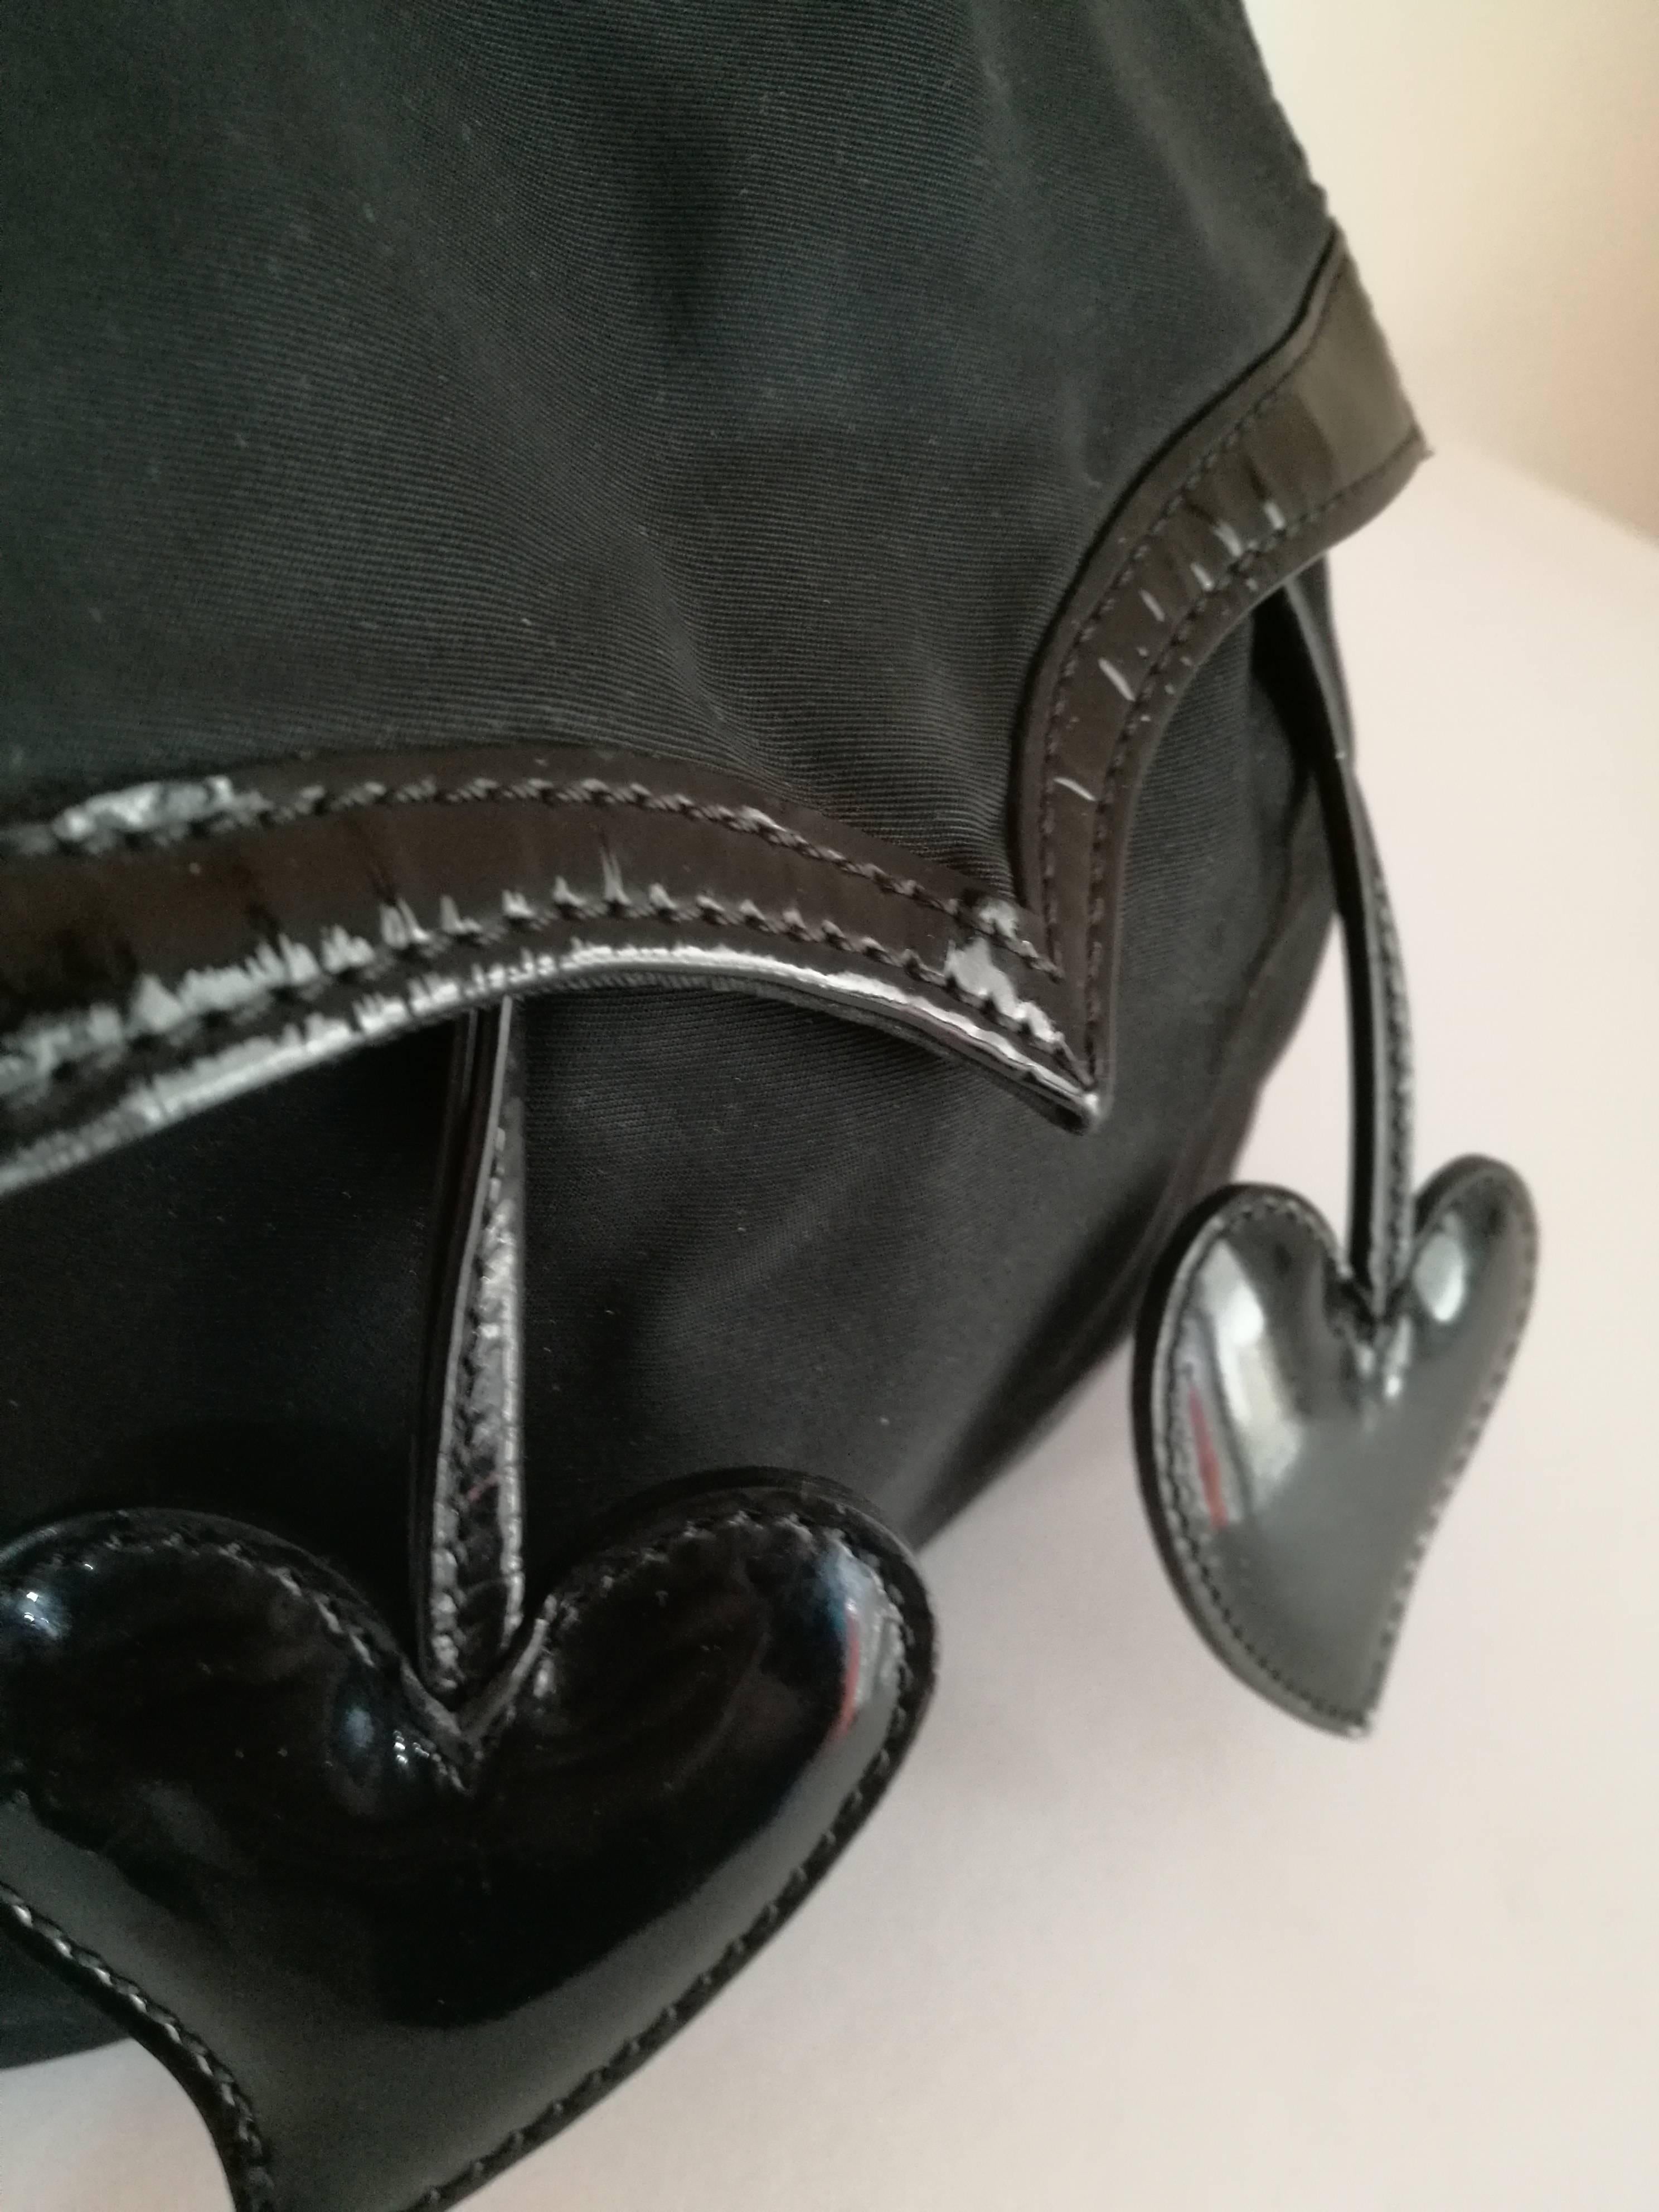 Christian Lacroix Black Hearts Backpack

Totally made in france

Gold tone hardware

height 30 cm

depth 11.5 cm

widht 19 cm